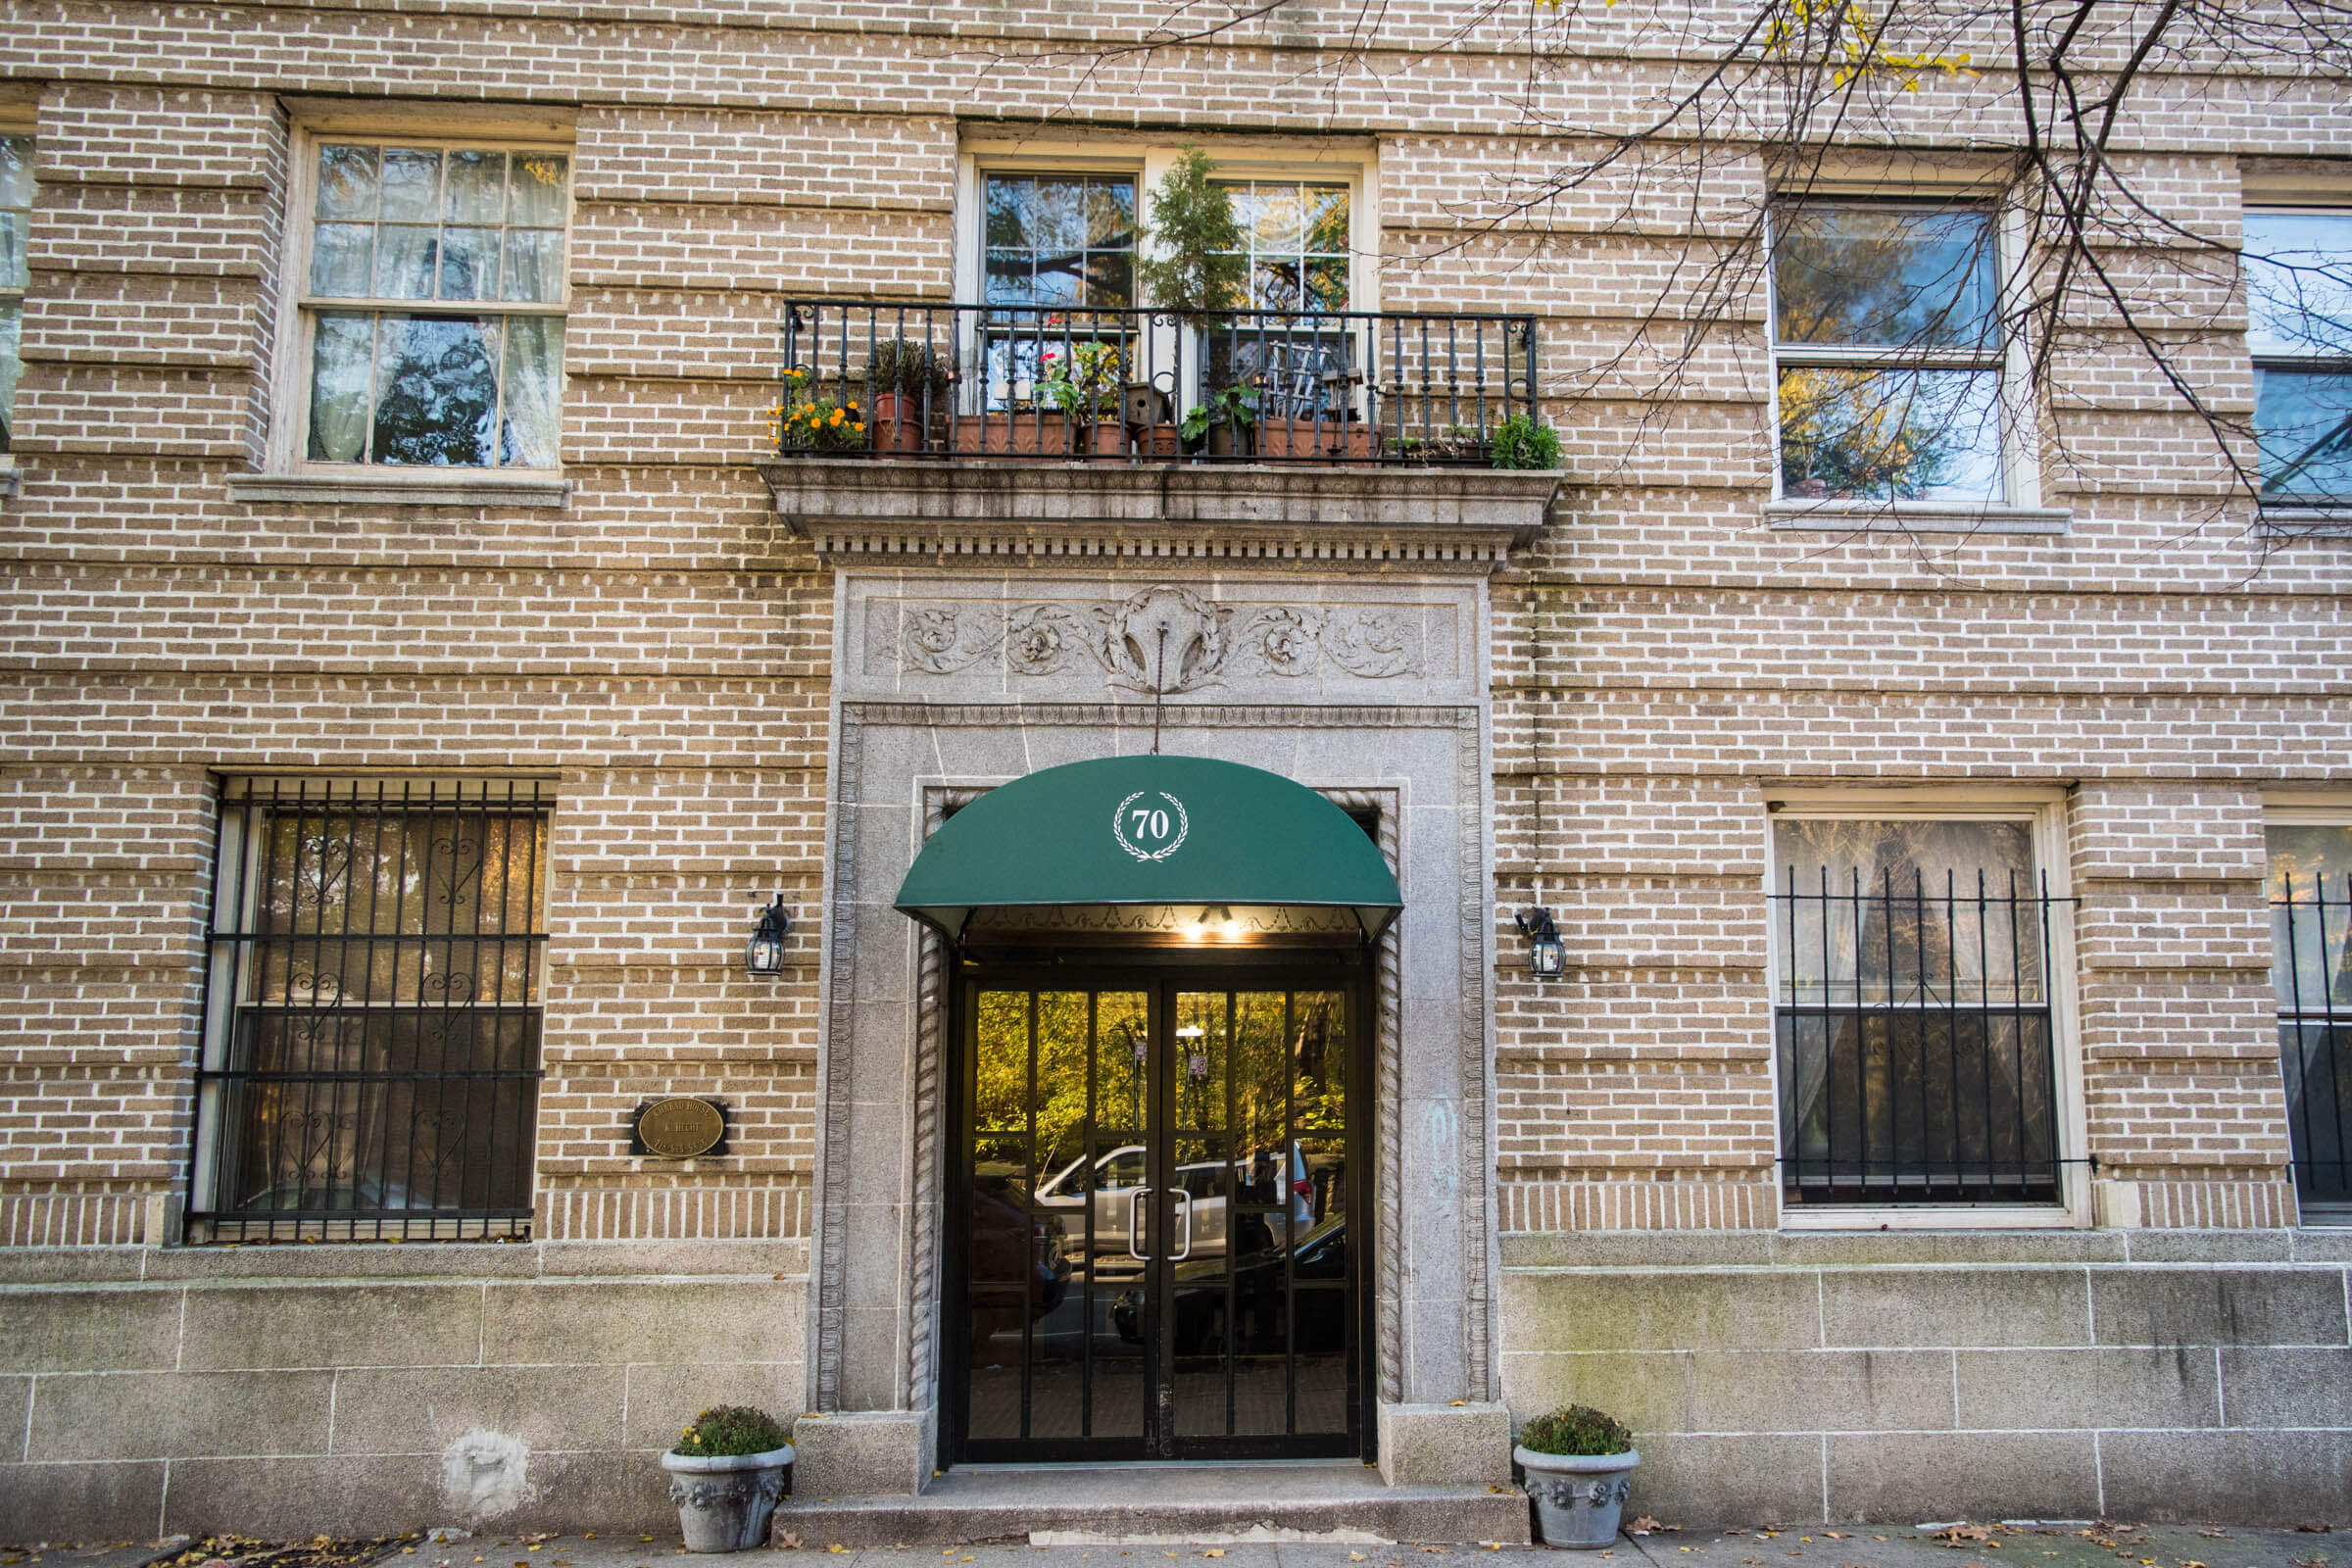 Brooklyn Real Estate & Apartments for Rent Park Slope